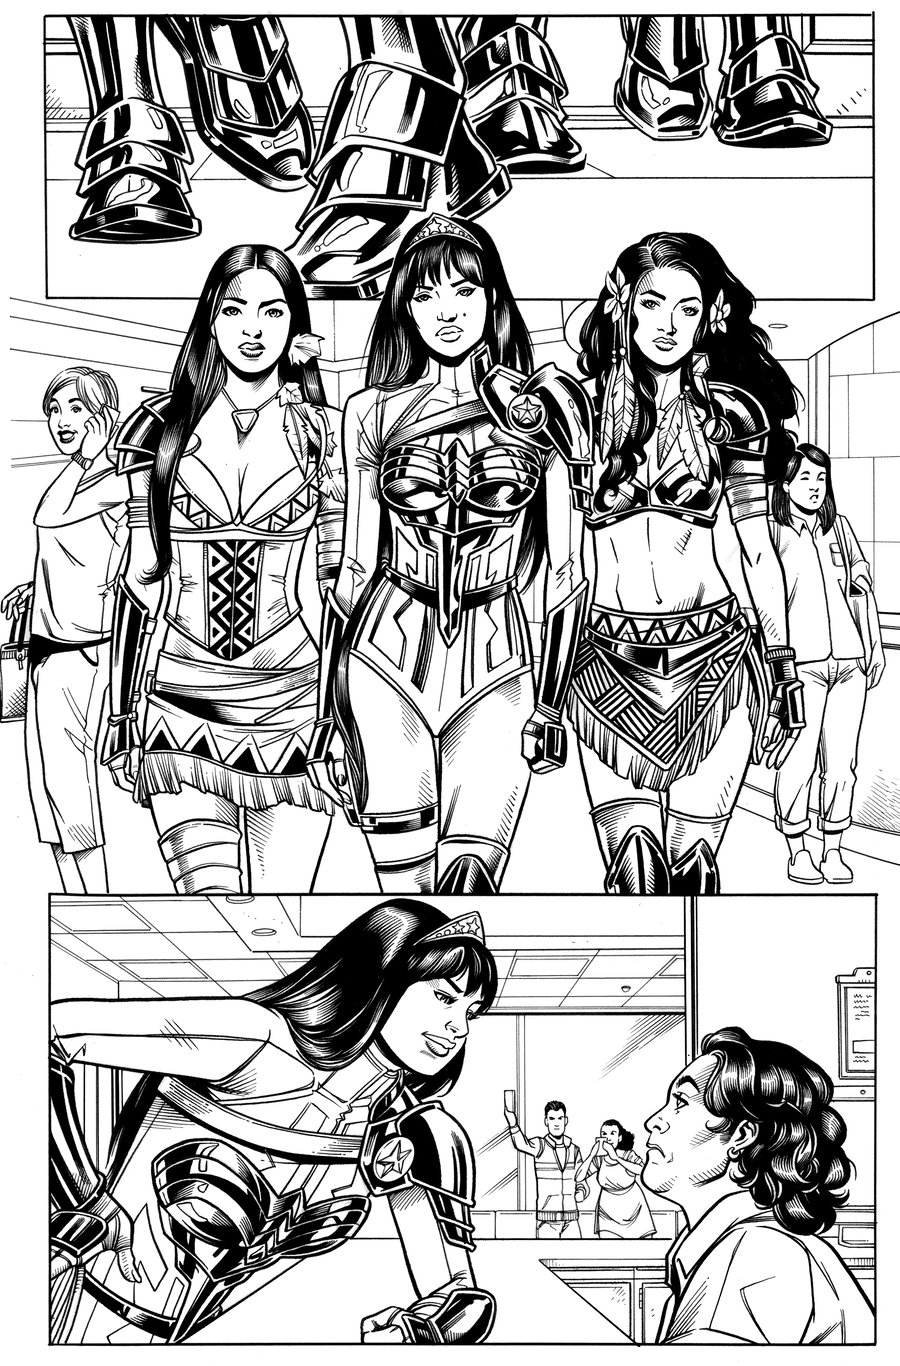 Image of Nubia: Queen of the Amazons #2 PG 10